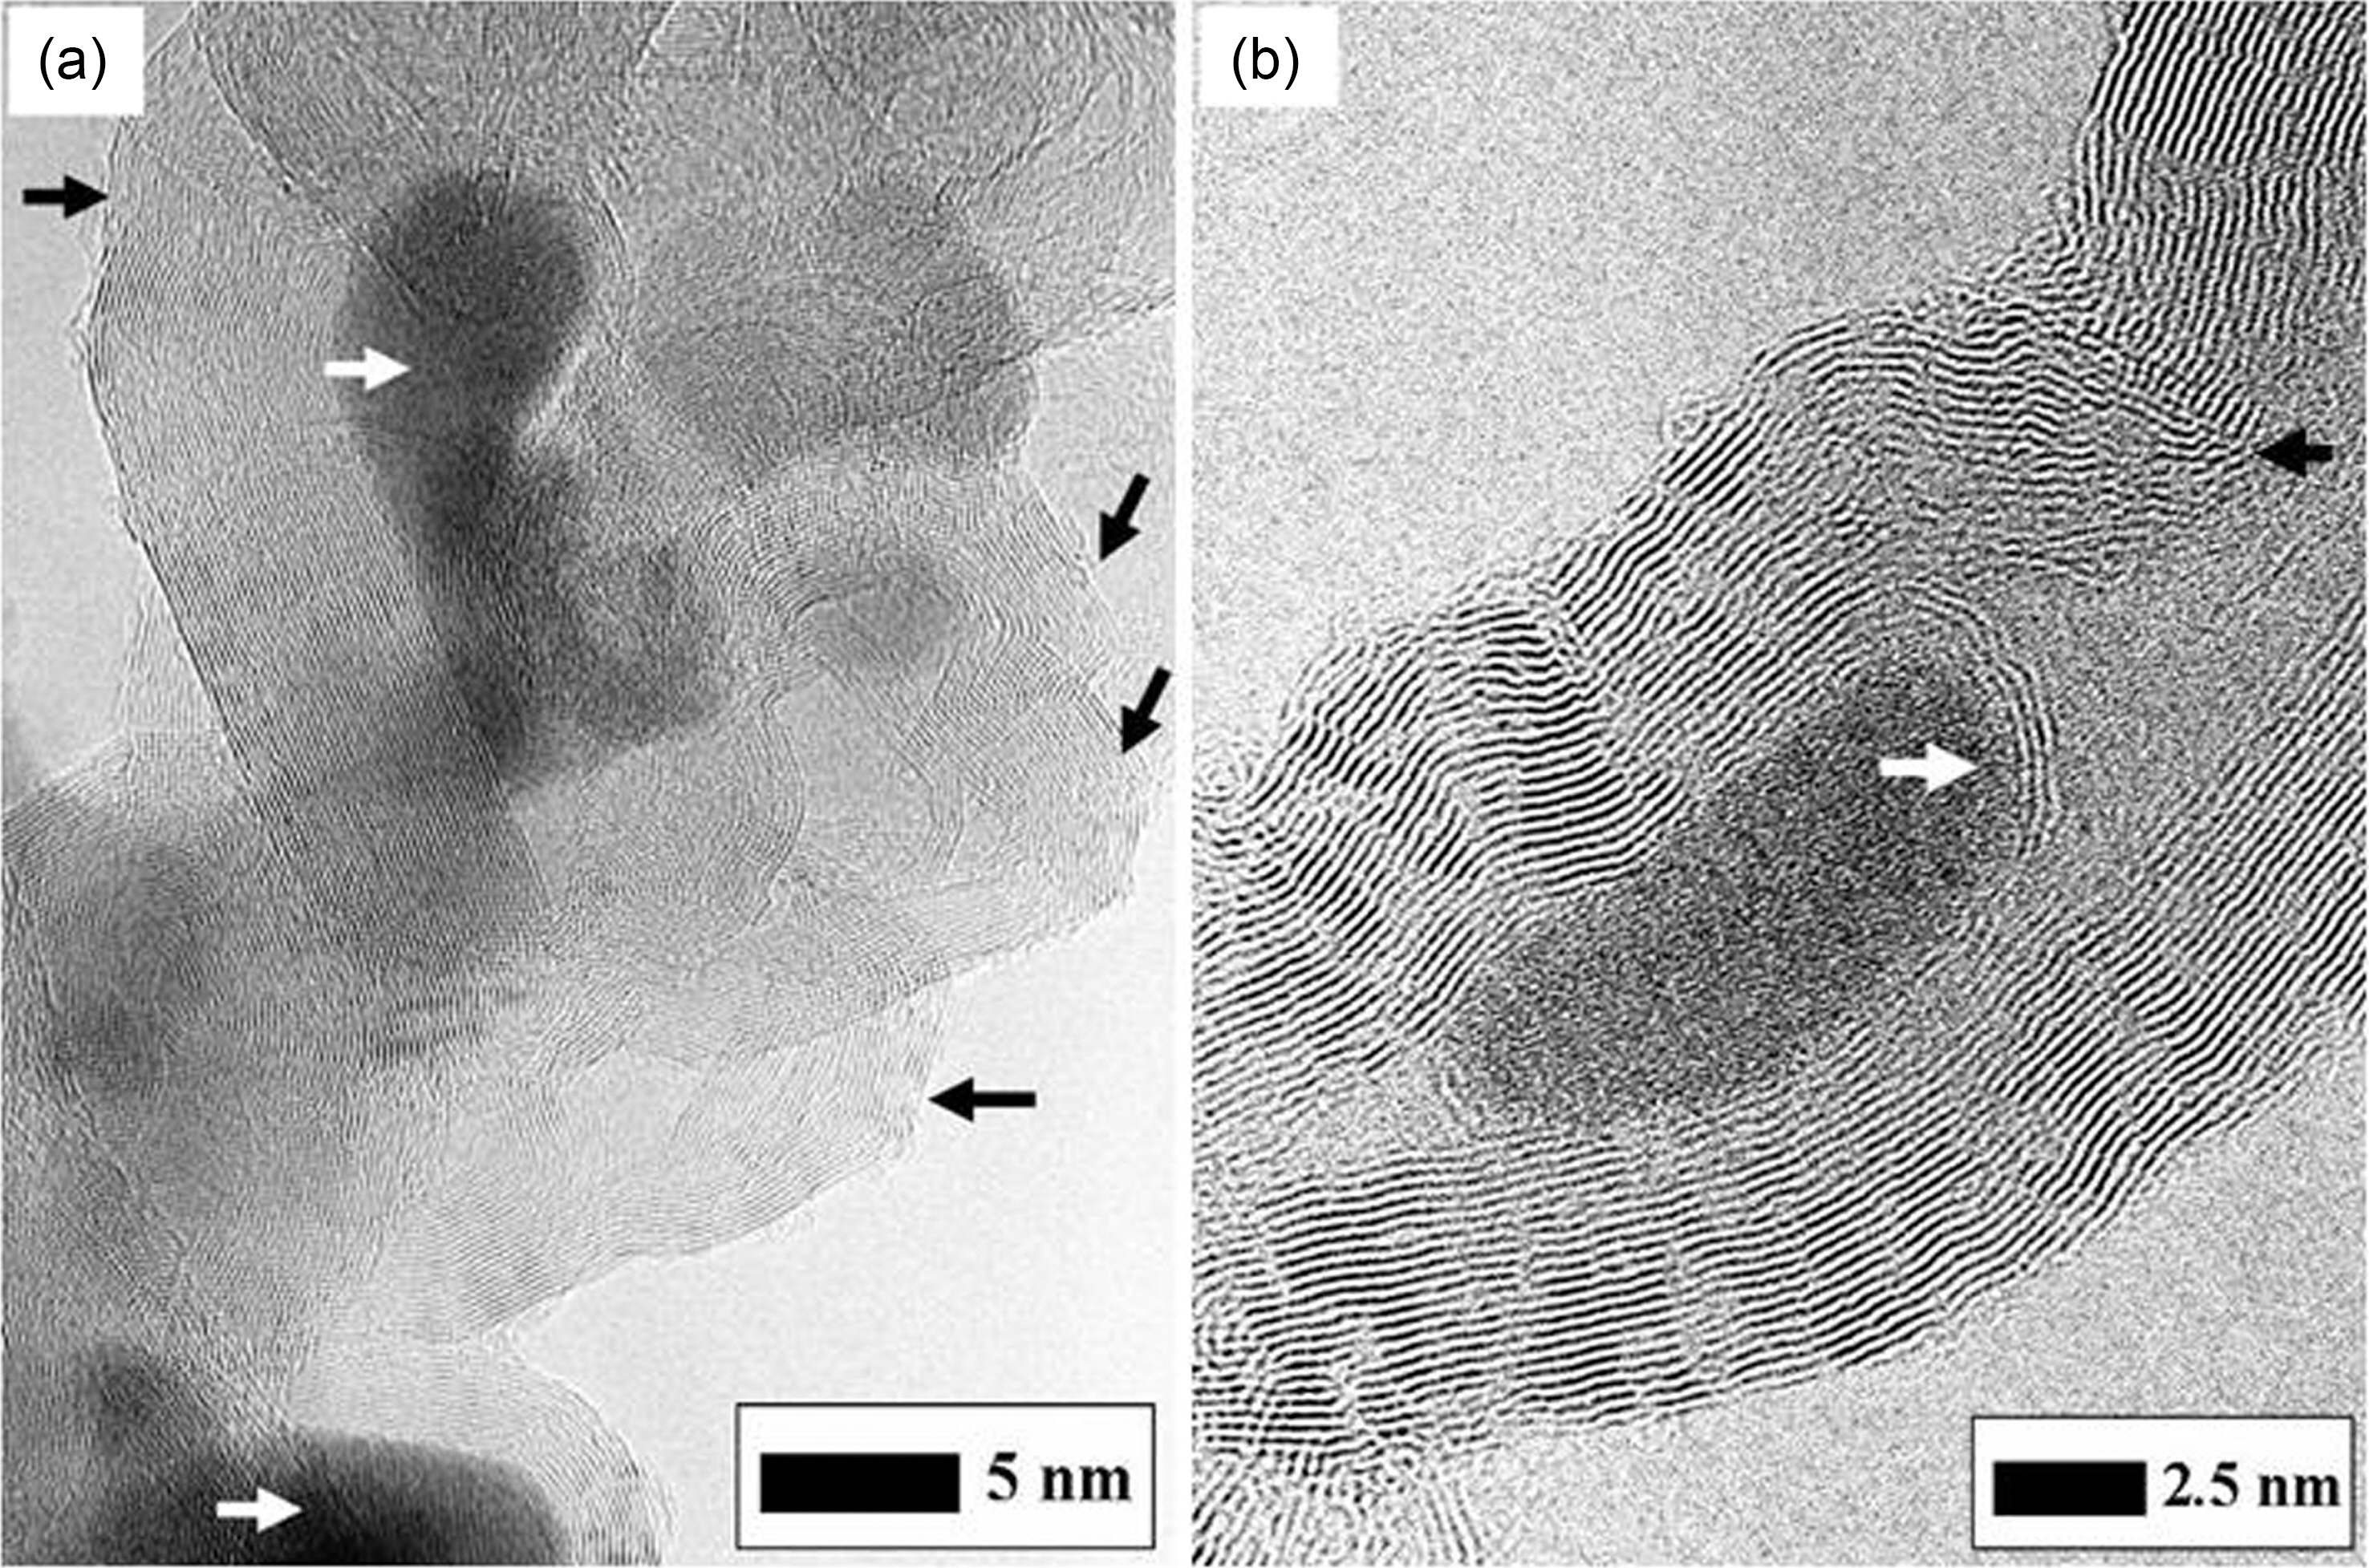 HRTEM images of the as-received MWNT: (a) is very sinuous and entangled including impurities (see the white arrow) and pre-existing defects (see the black arrow) and (b) shows asymmetrical formation of inside cap.